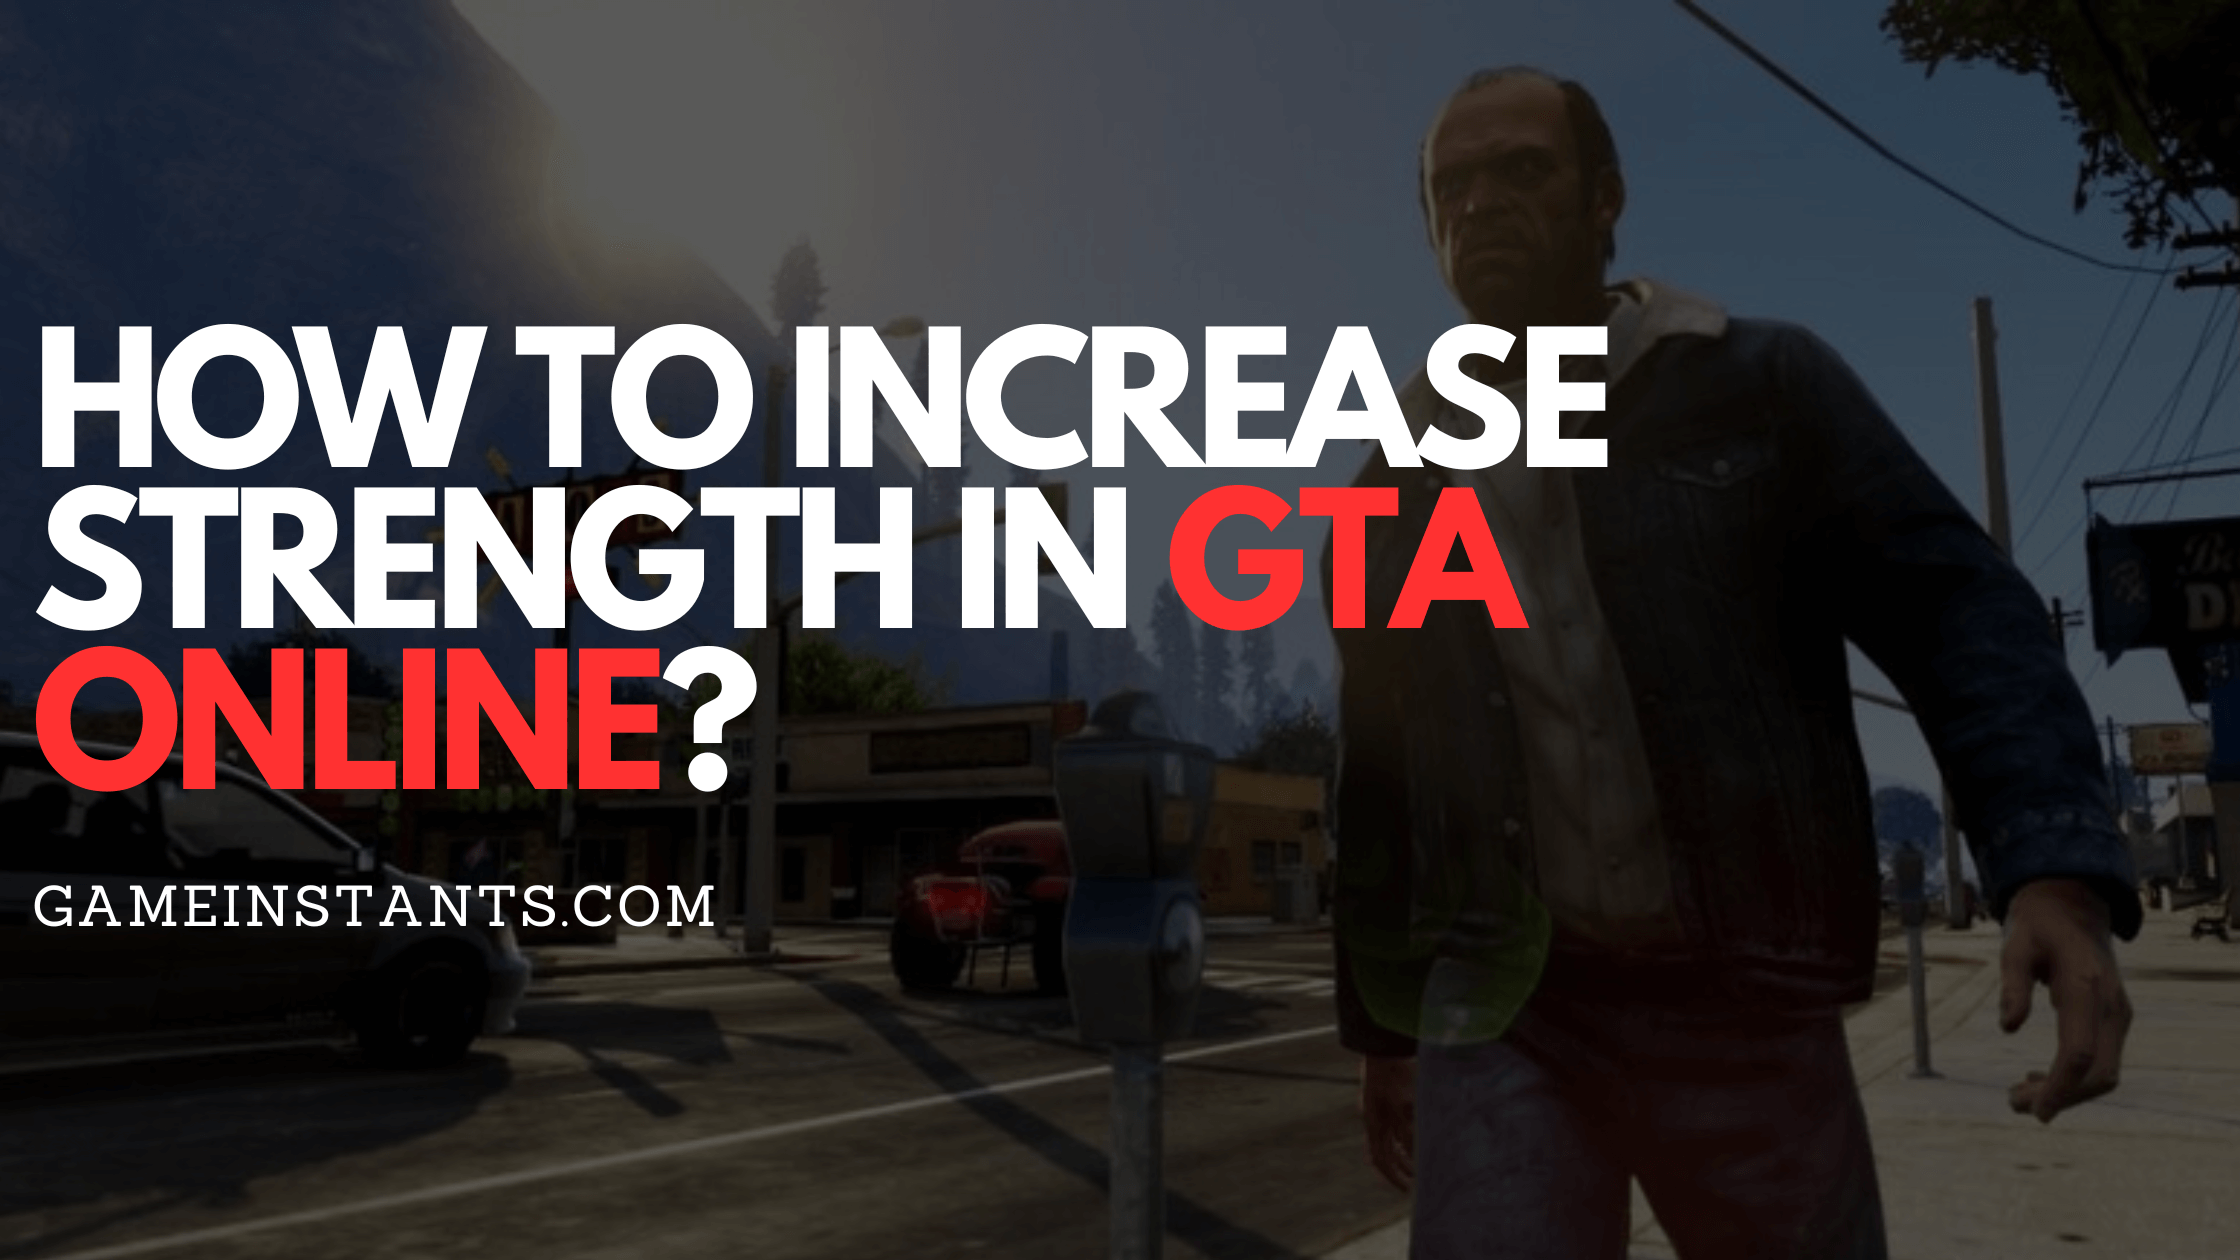 How to Increase Strength in GTA Online